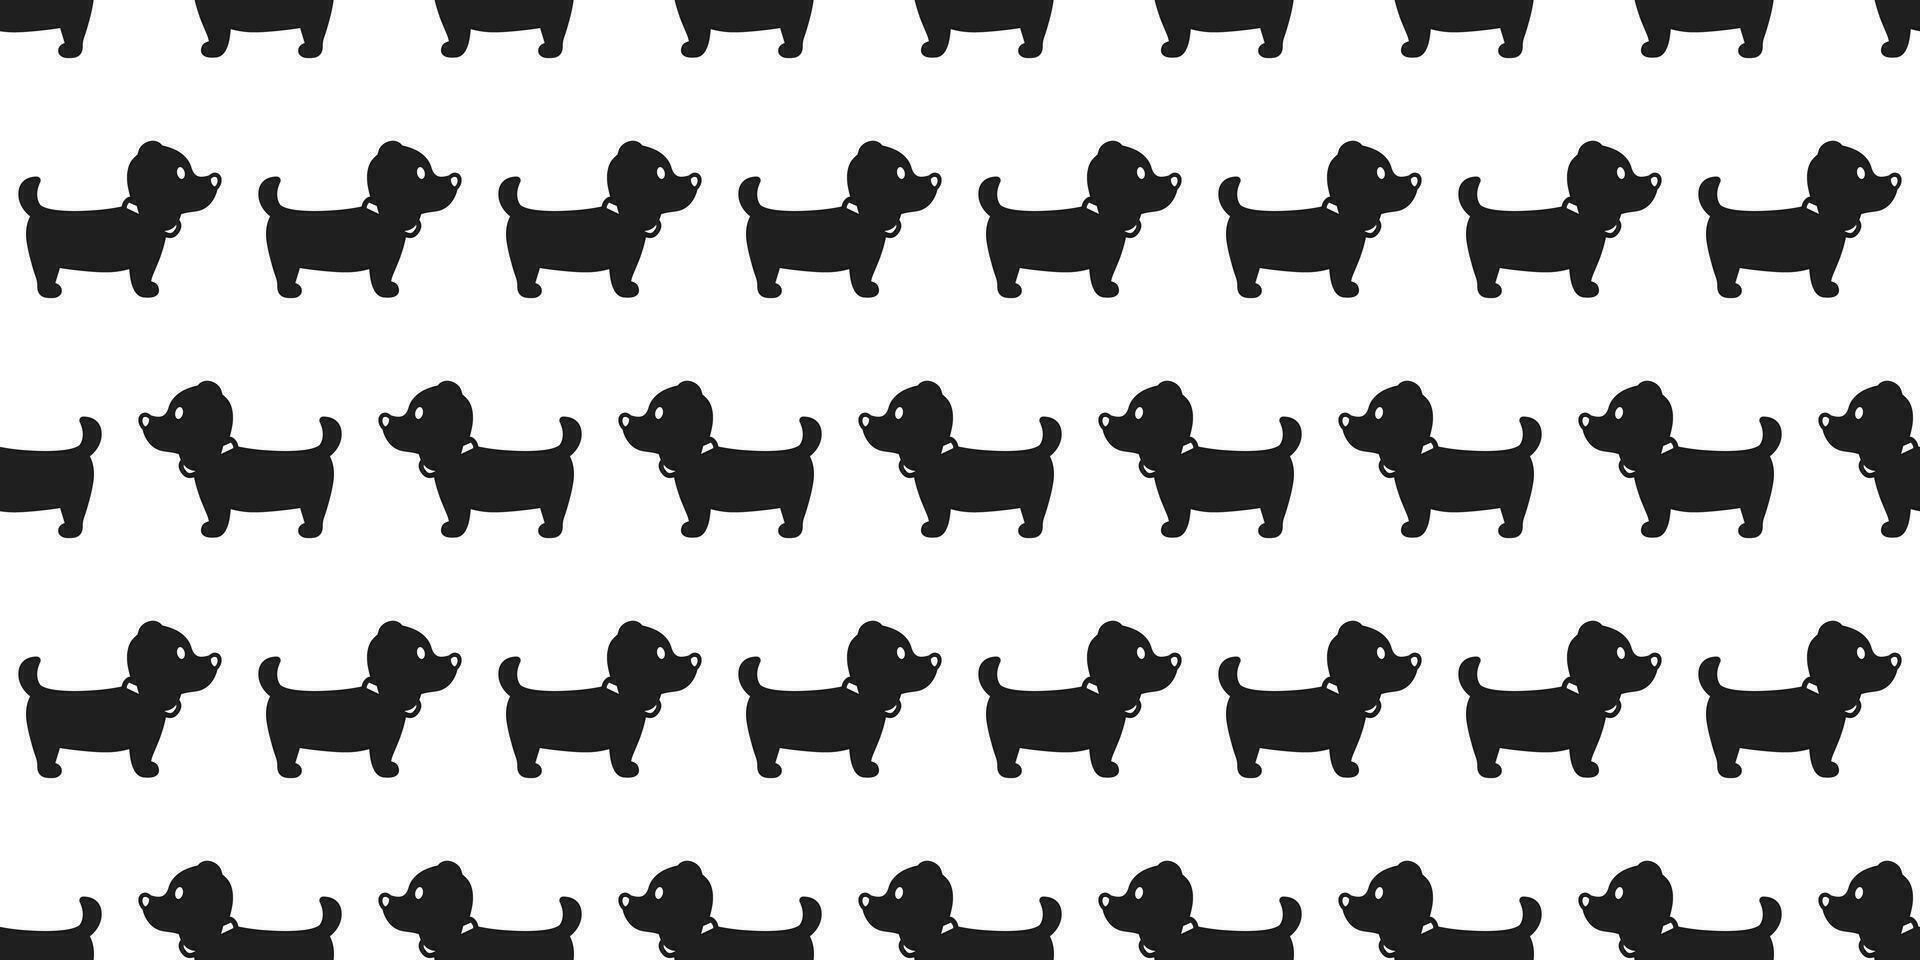 Dog seamless pattern vector french bulldog dachshund puppy scarf isolated cartoon illustration repeat wallpaper tile background